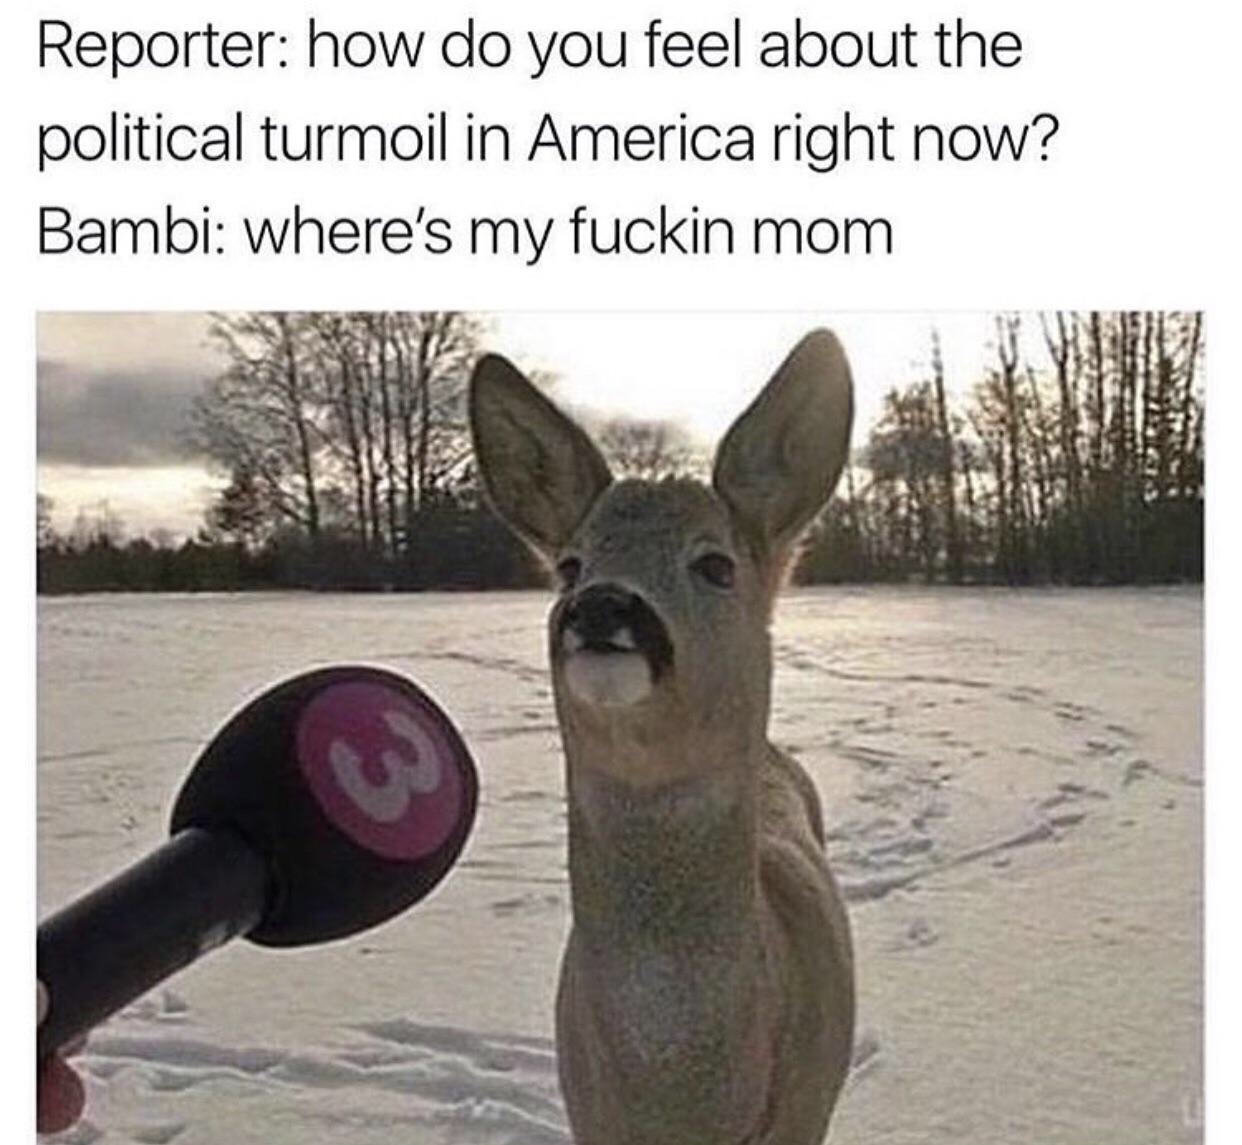 memes - wheres my fuckin mom - Reporter how do you feel about the political turmoil in America right now? Bambi where's my fuckin mom